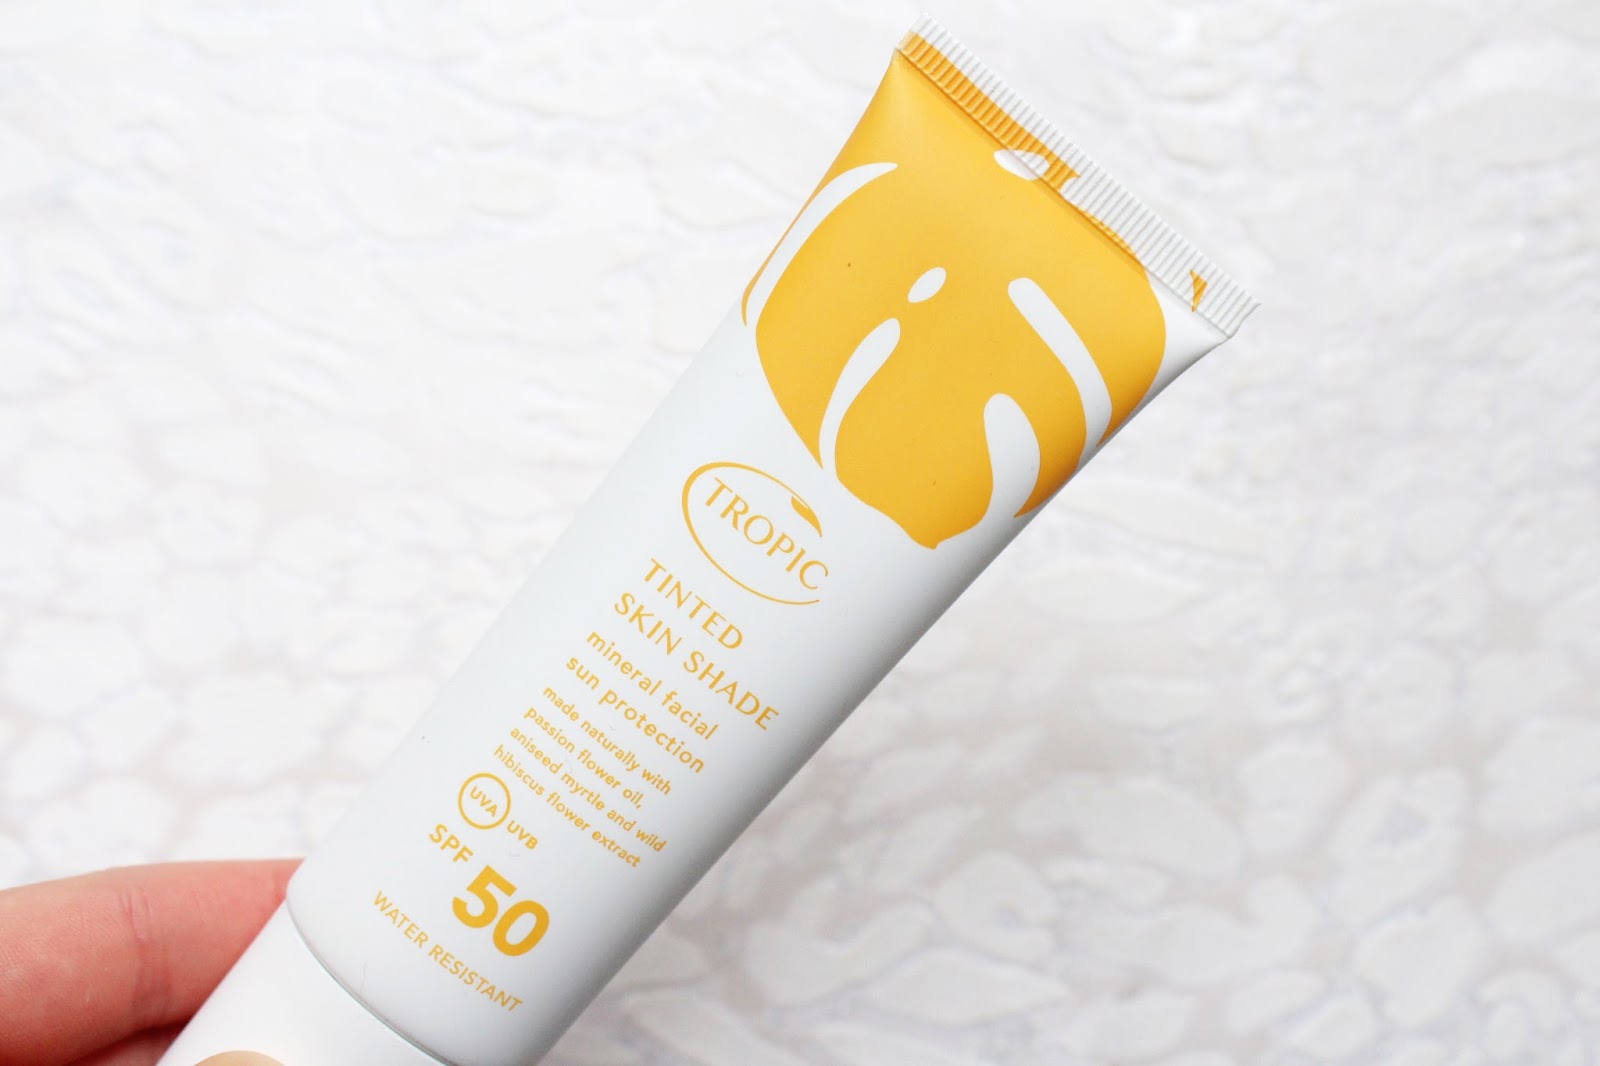 Tropic Mineral Sun Protection